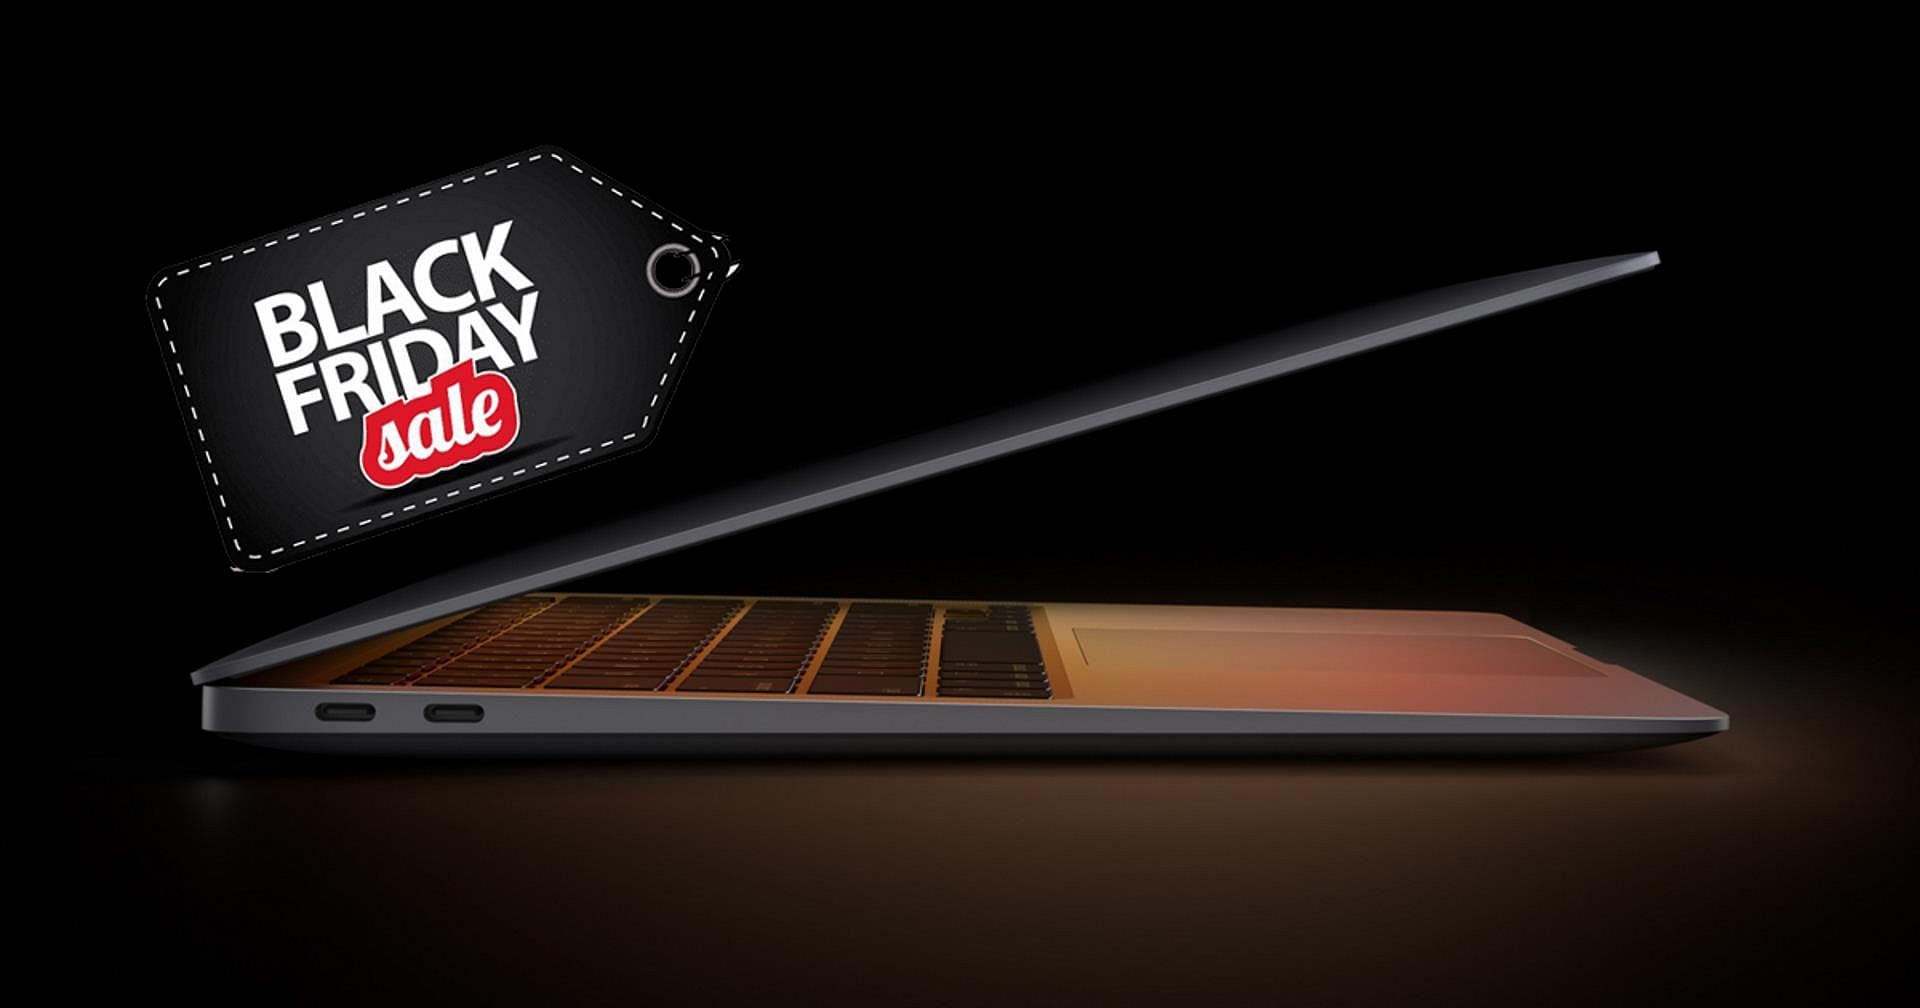 The 13-inch MacBook Air is discounted to under $889 on Black Friday sale (Image via Apple)